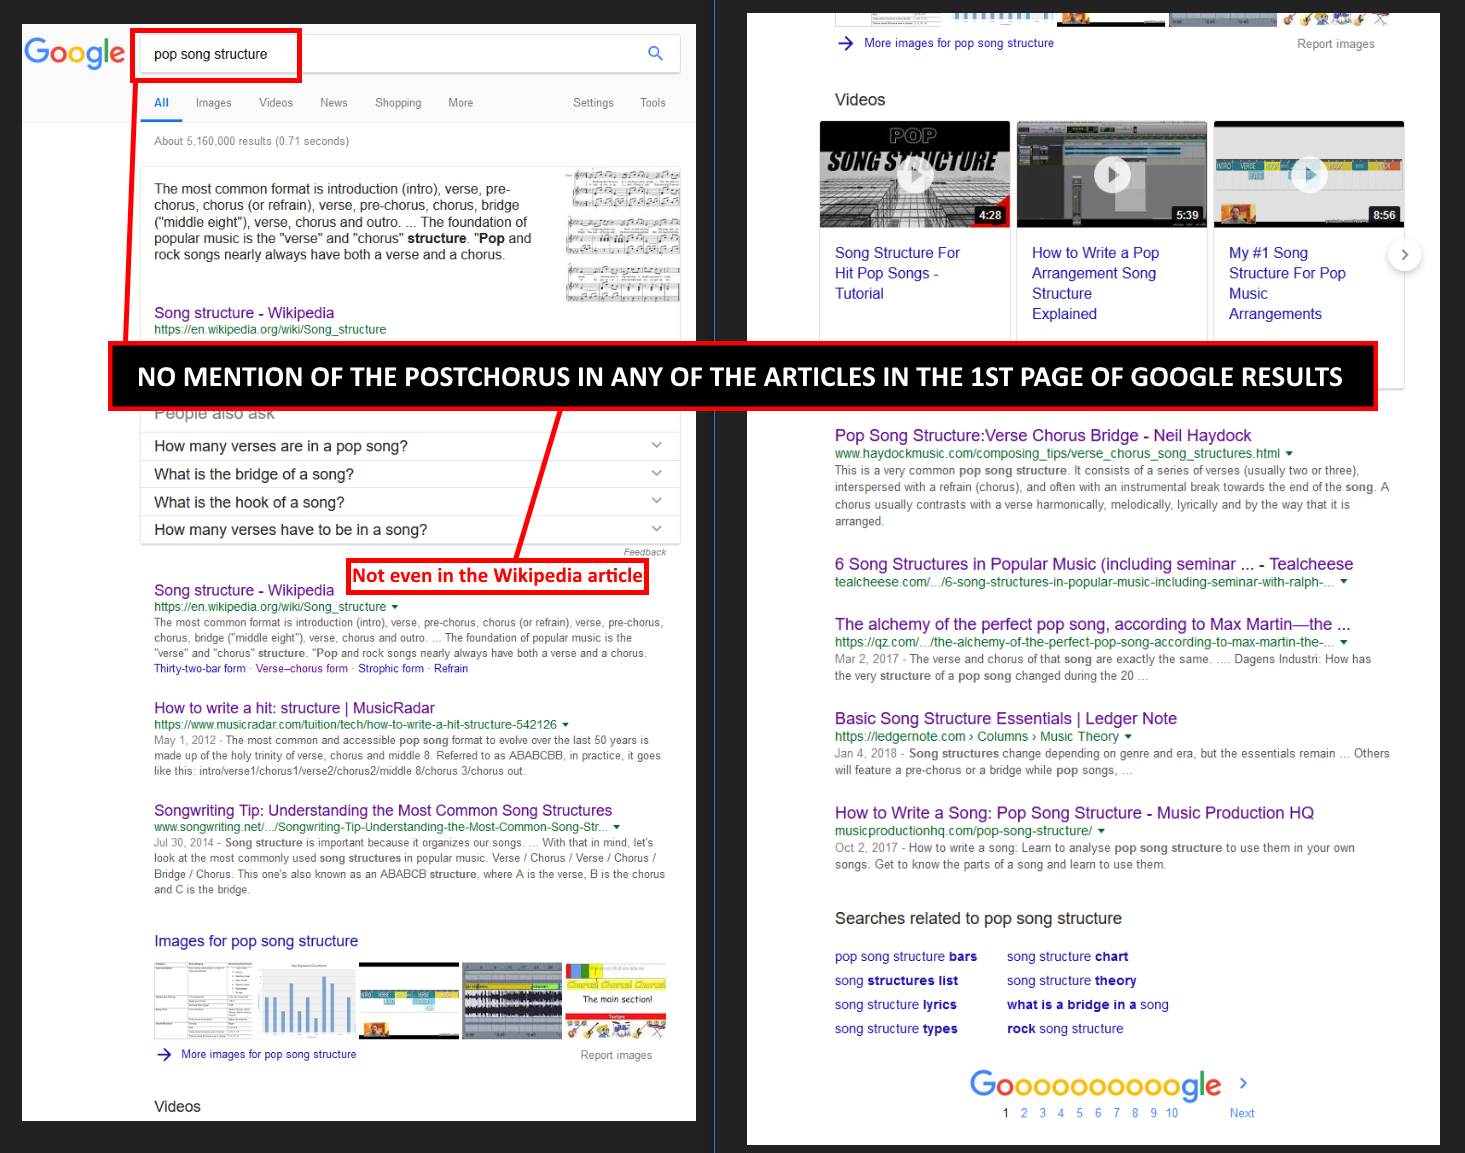 First page of Google results for "pop song structure" - There is no mention of the postchorus in any of the articles (click for full size)